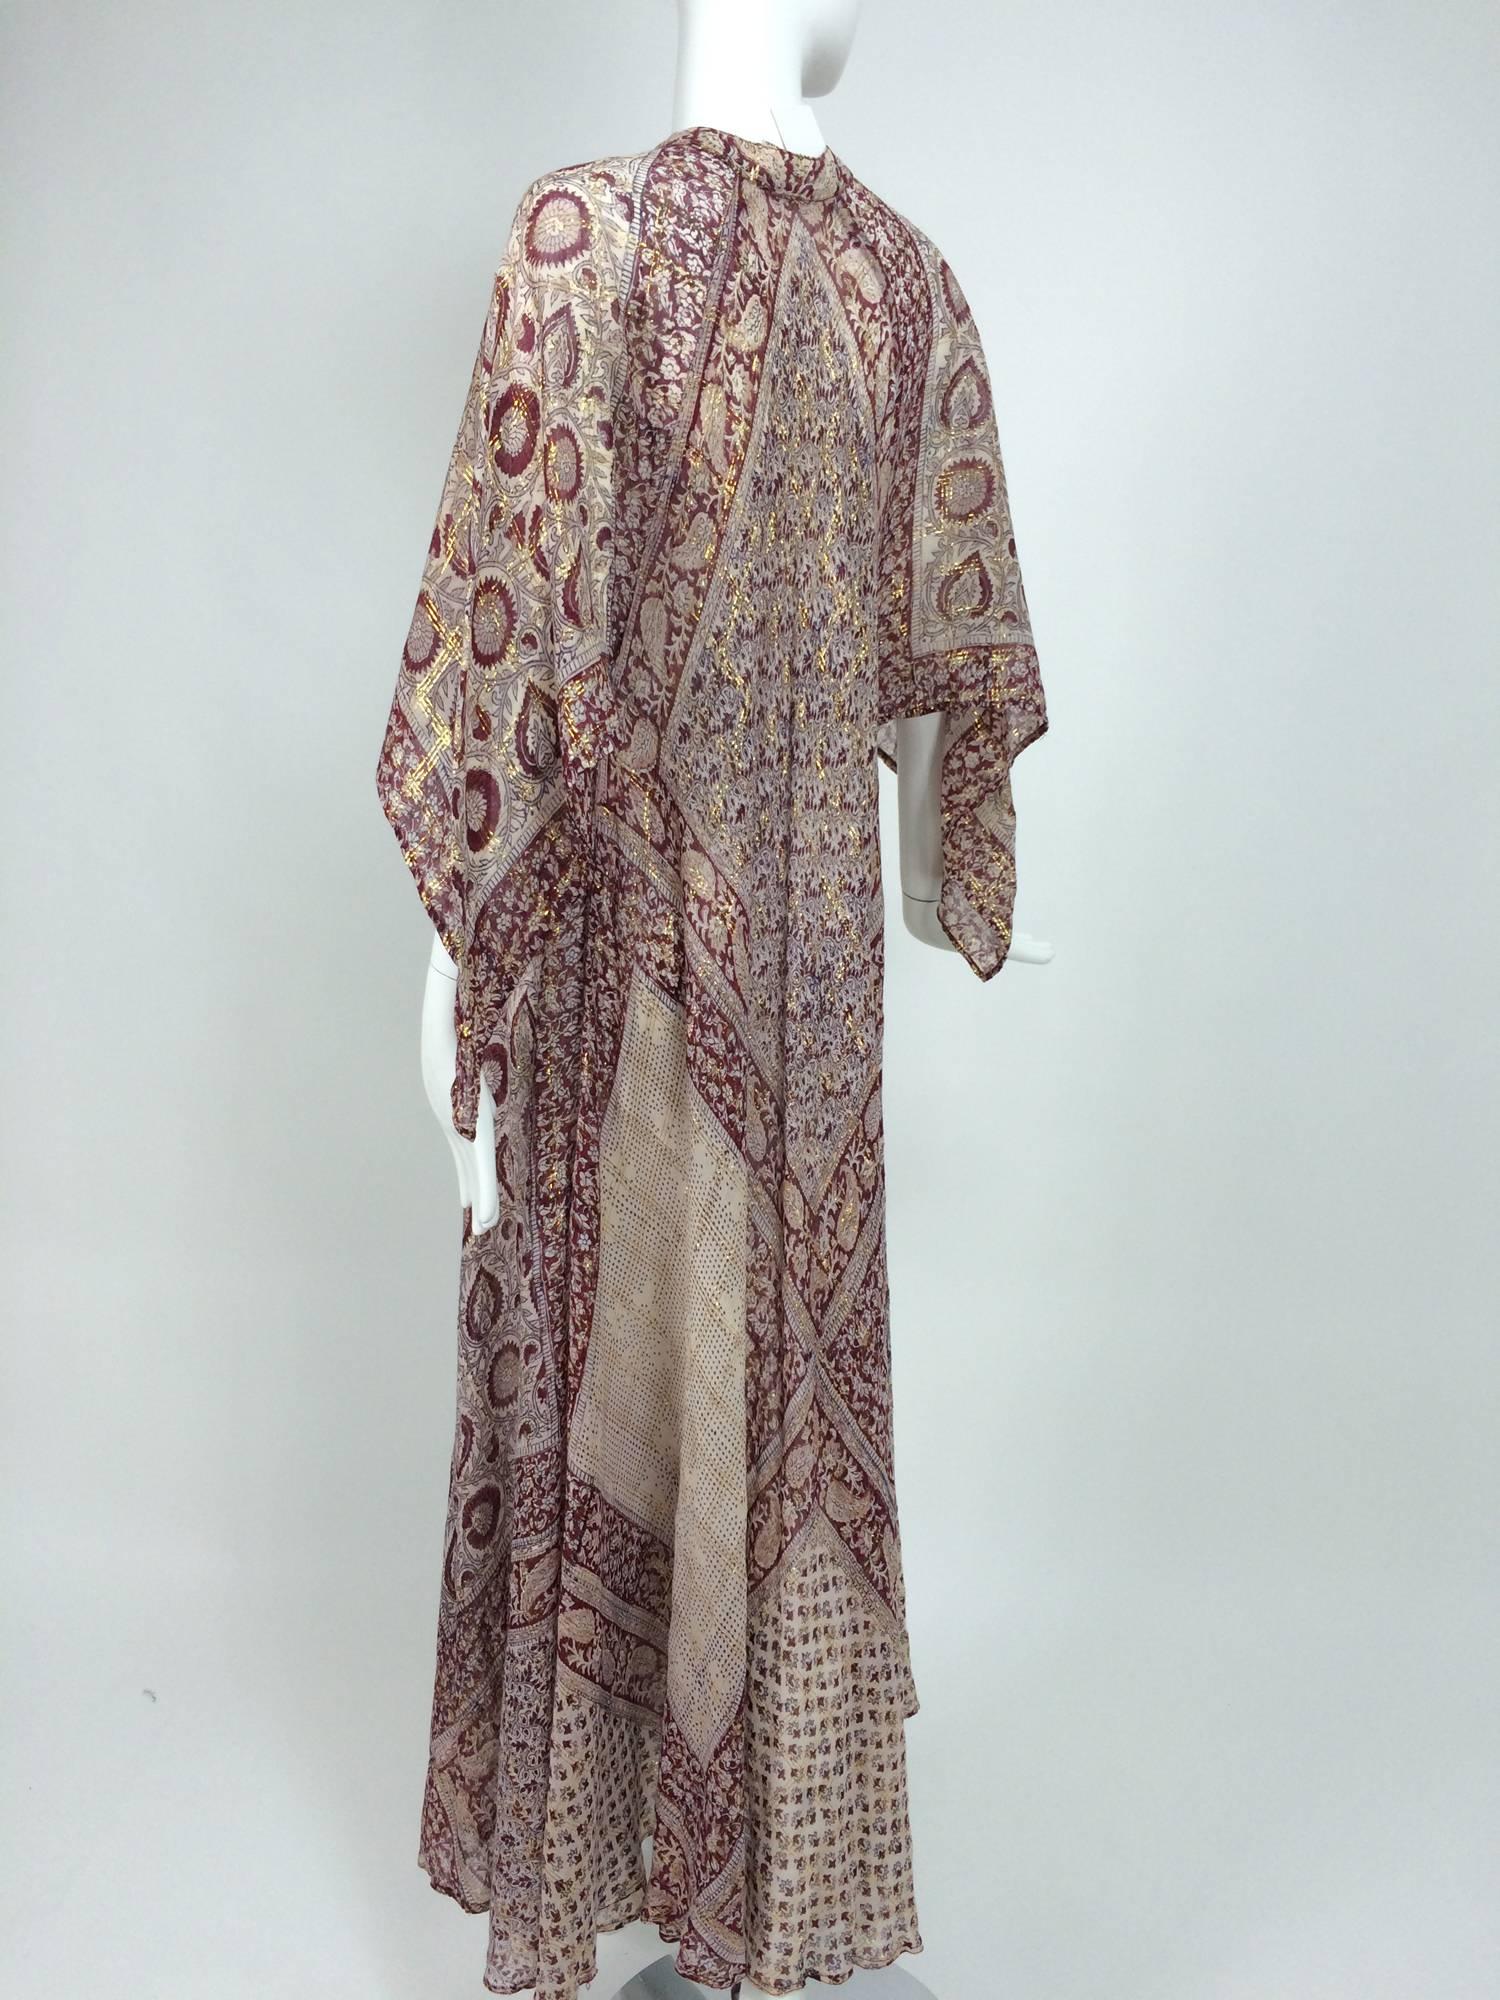 Sheer gauze block print with gold caftan from India 1960s Woodward & Lothrop 2